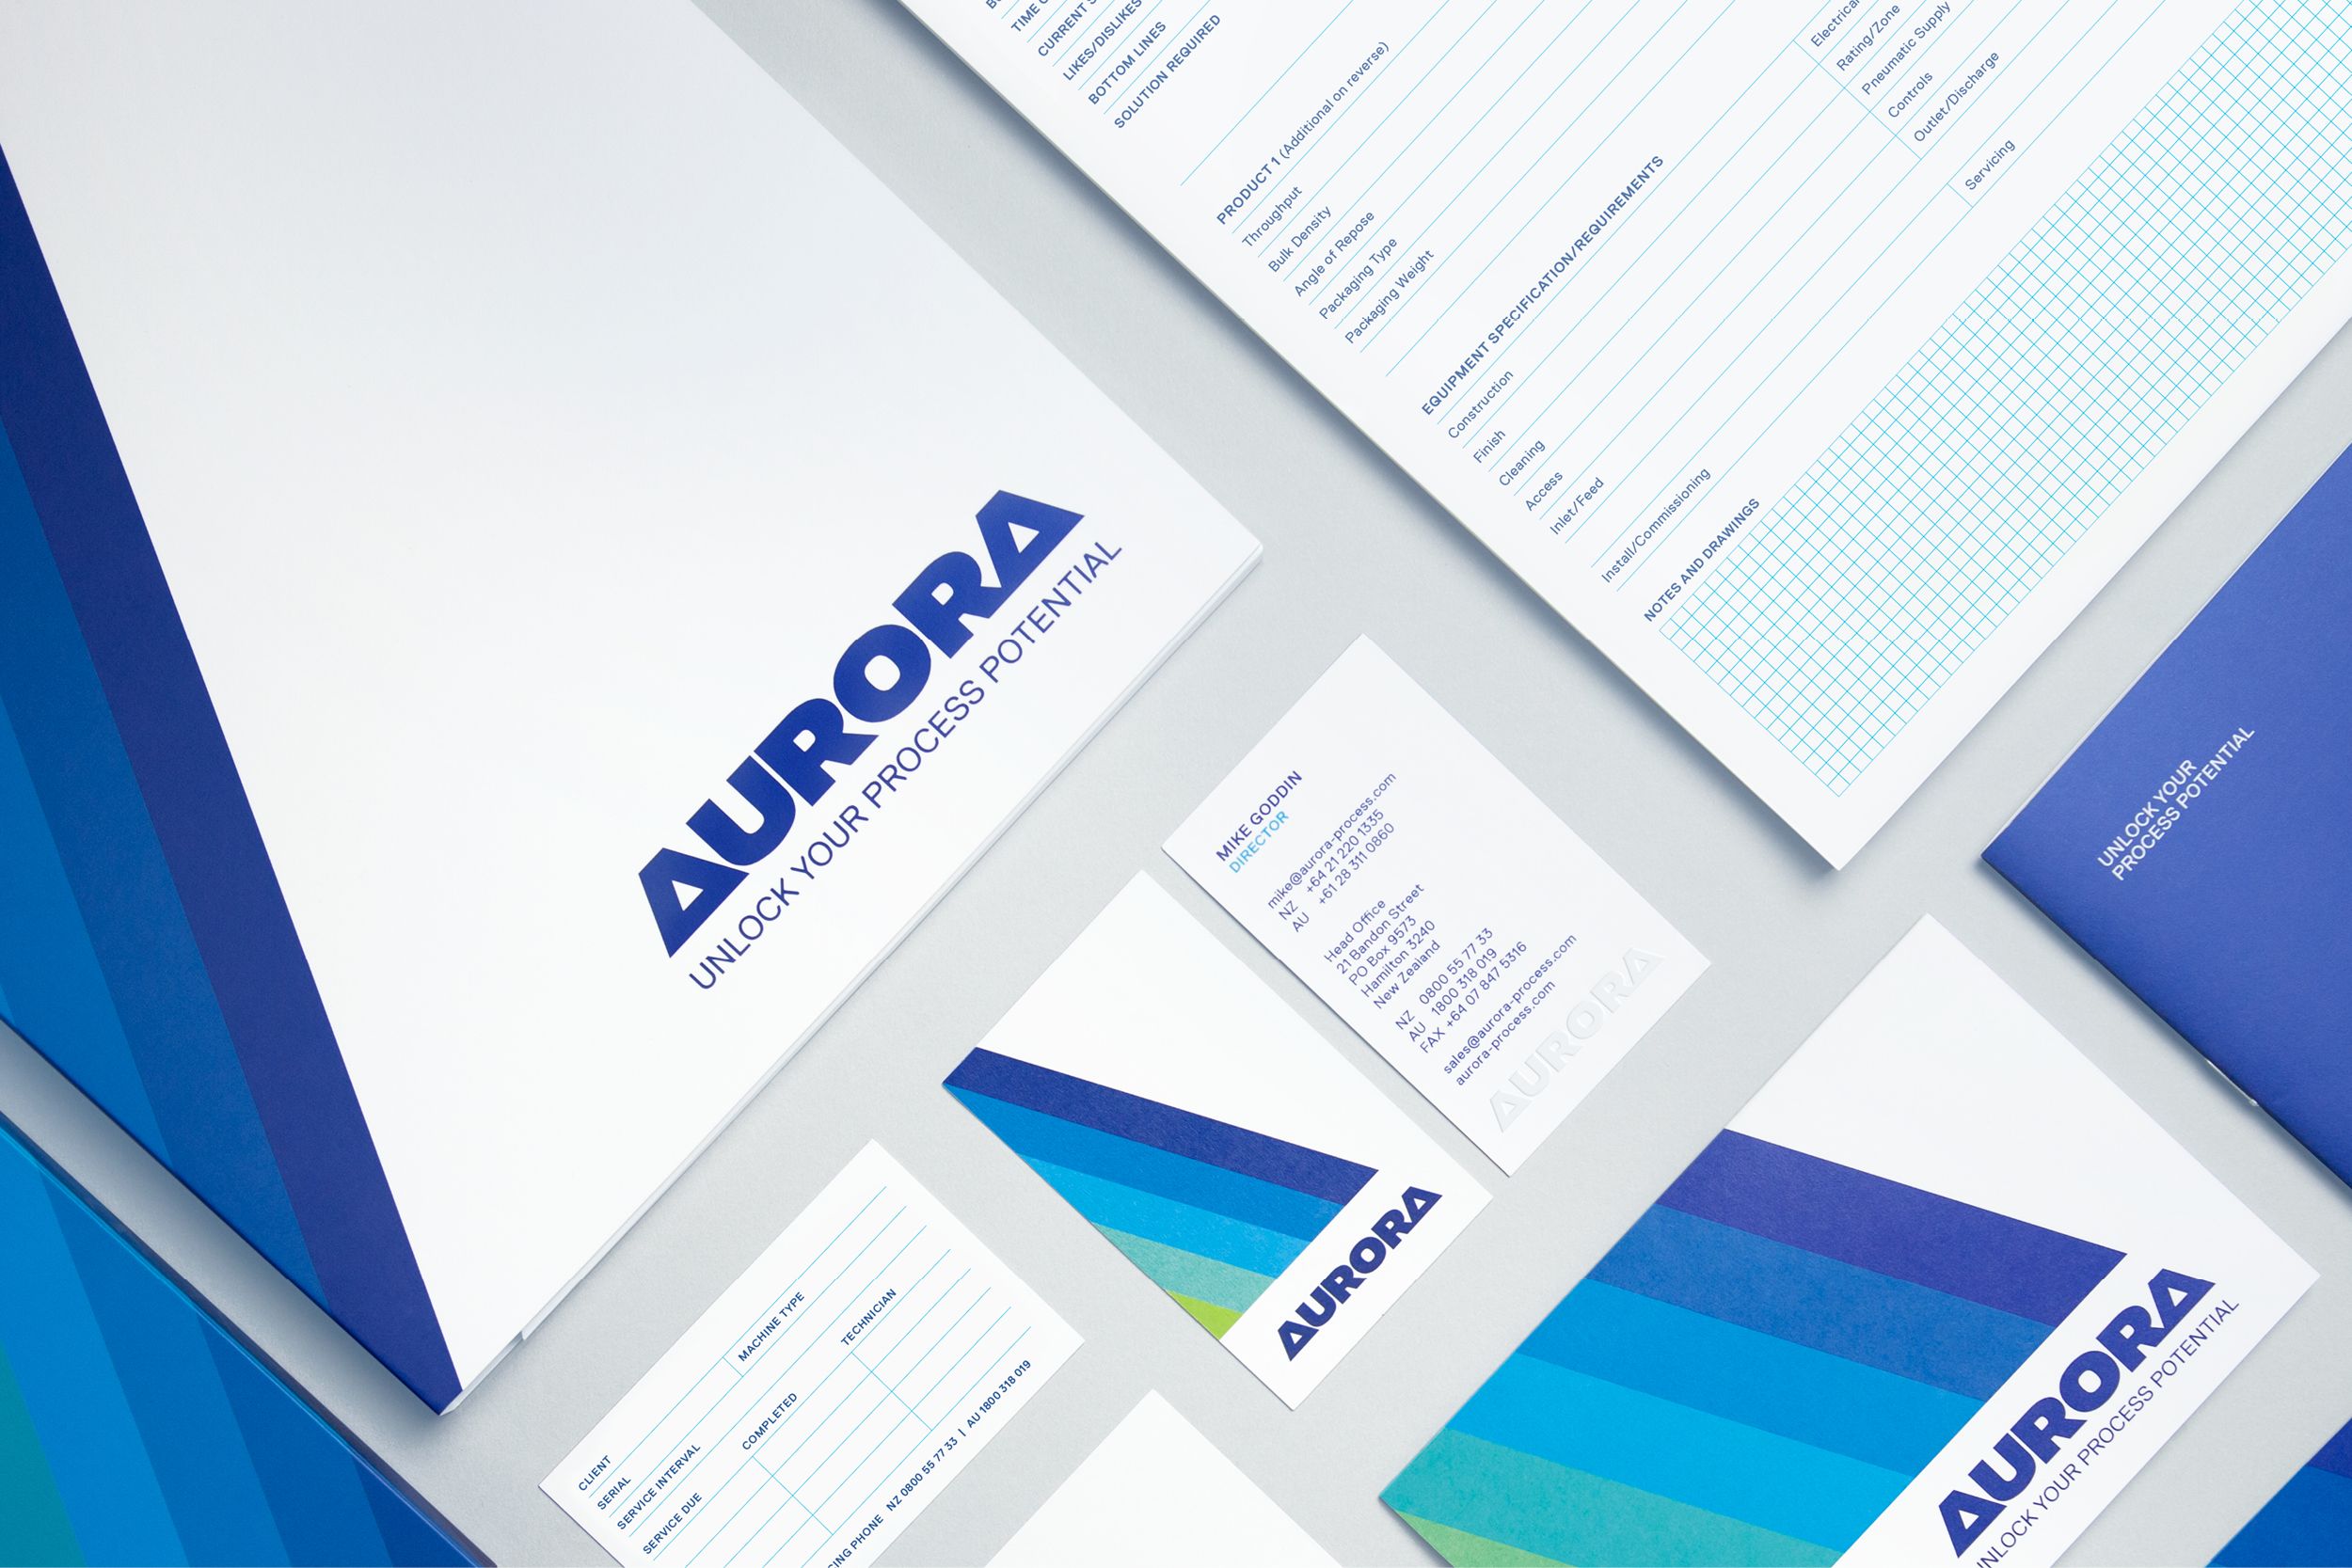 Various designed pieces of collateral including publications, business cards and resource documents